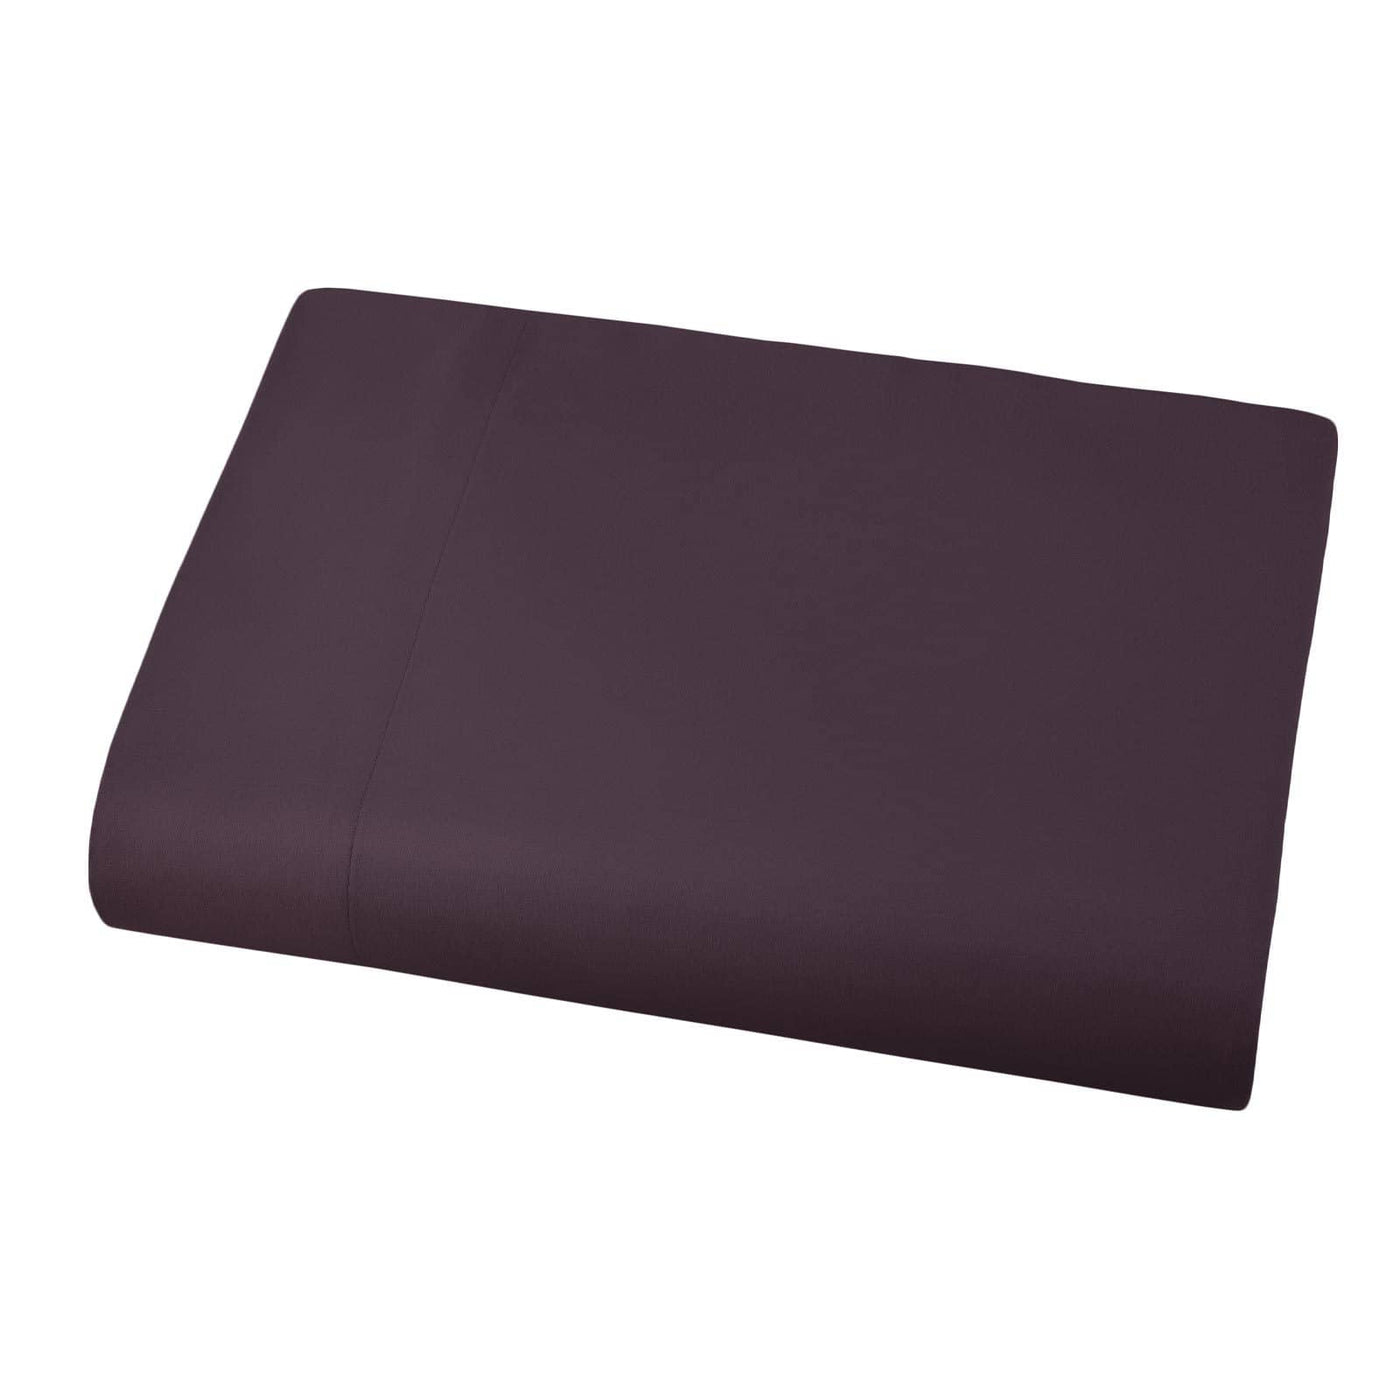 Soft and Luxurious Over-sized Flat Sheet 132 in x 110 in by Vilano springs in Purple#color_vilano-purple